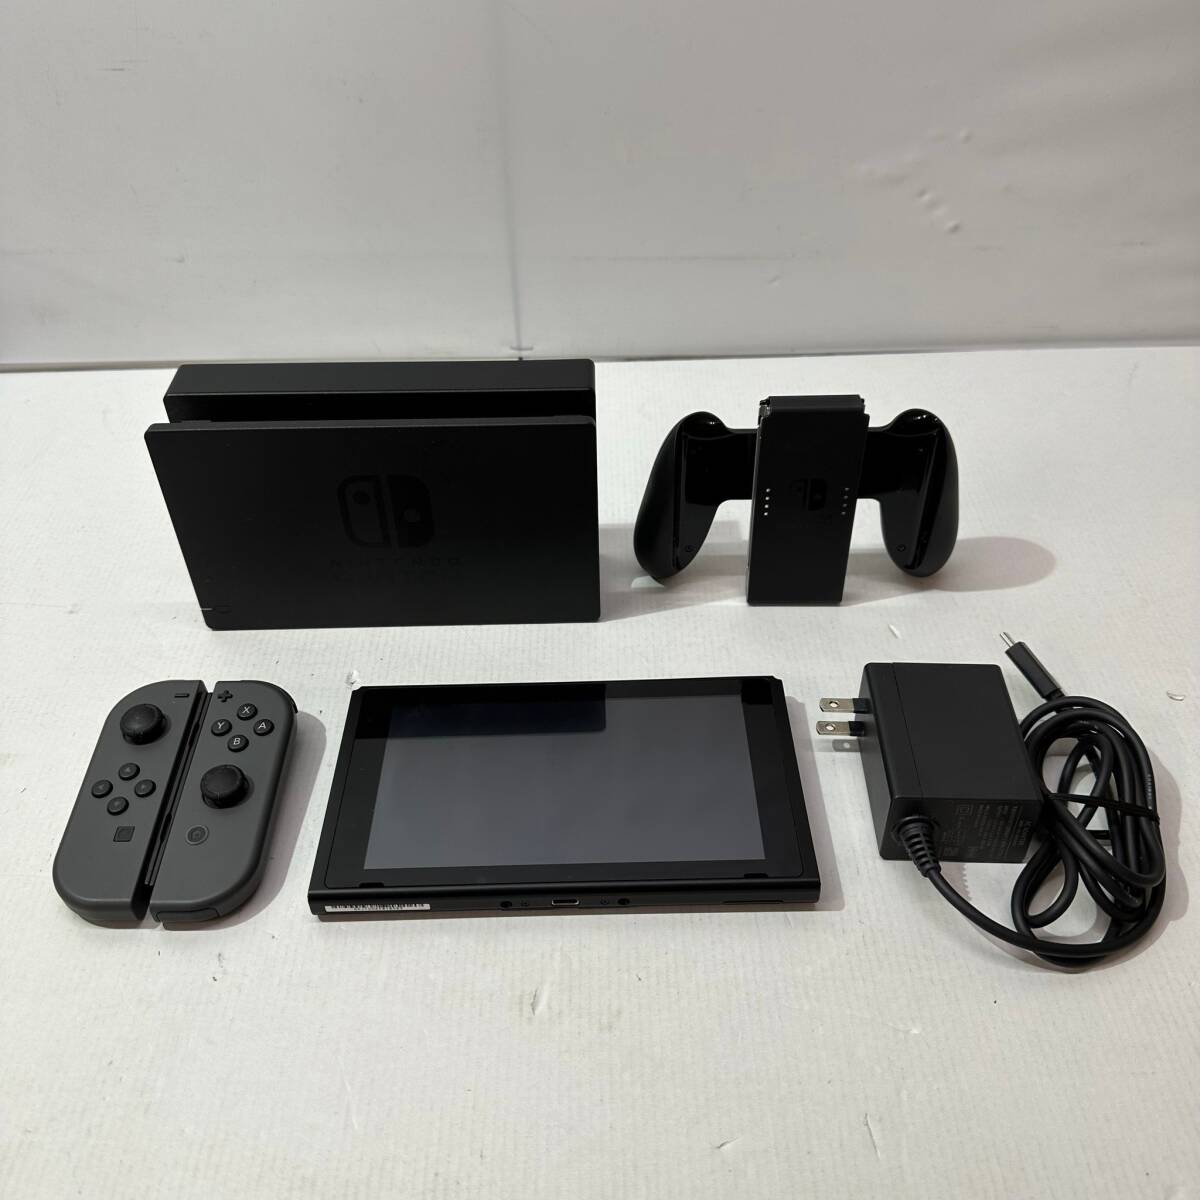 No.5774 *1 jpy ~[Nintendo Switch] switch old model gray body operation verification settled secondhand goods 